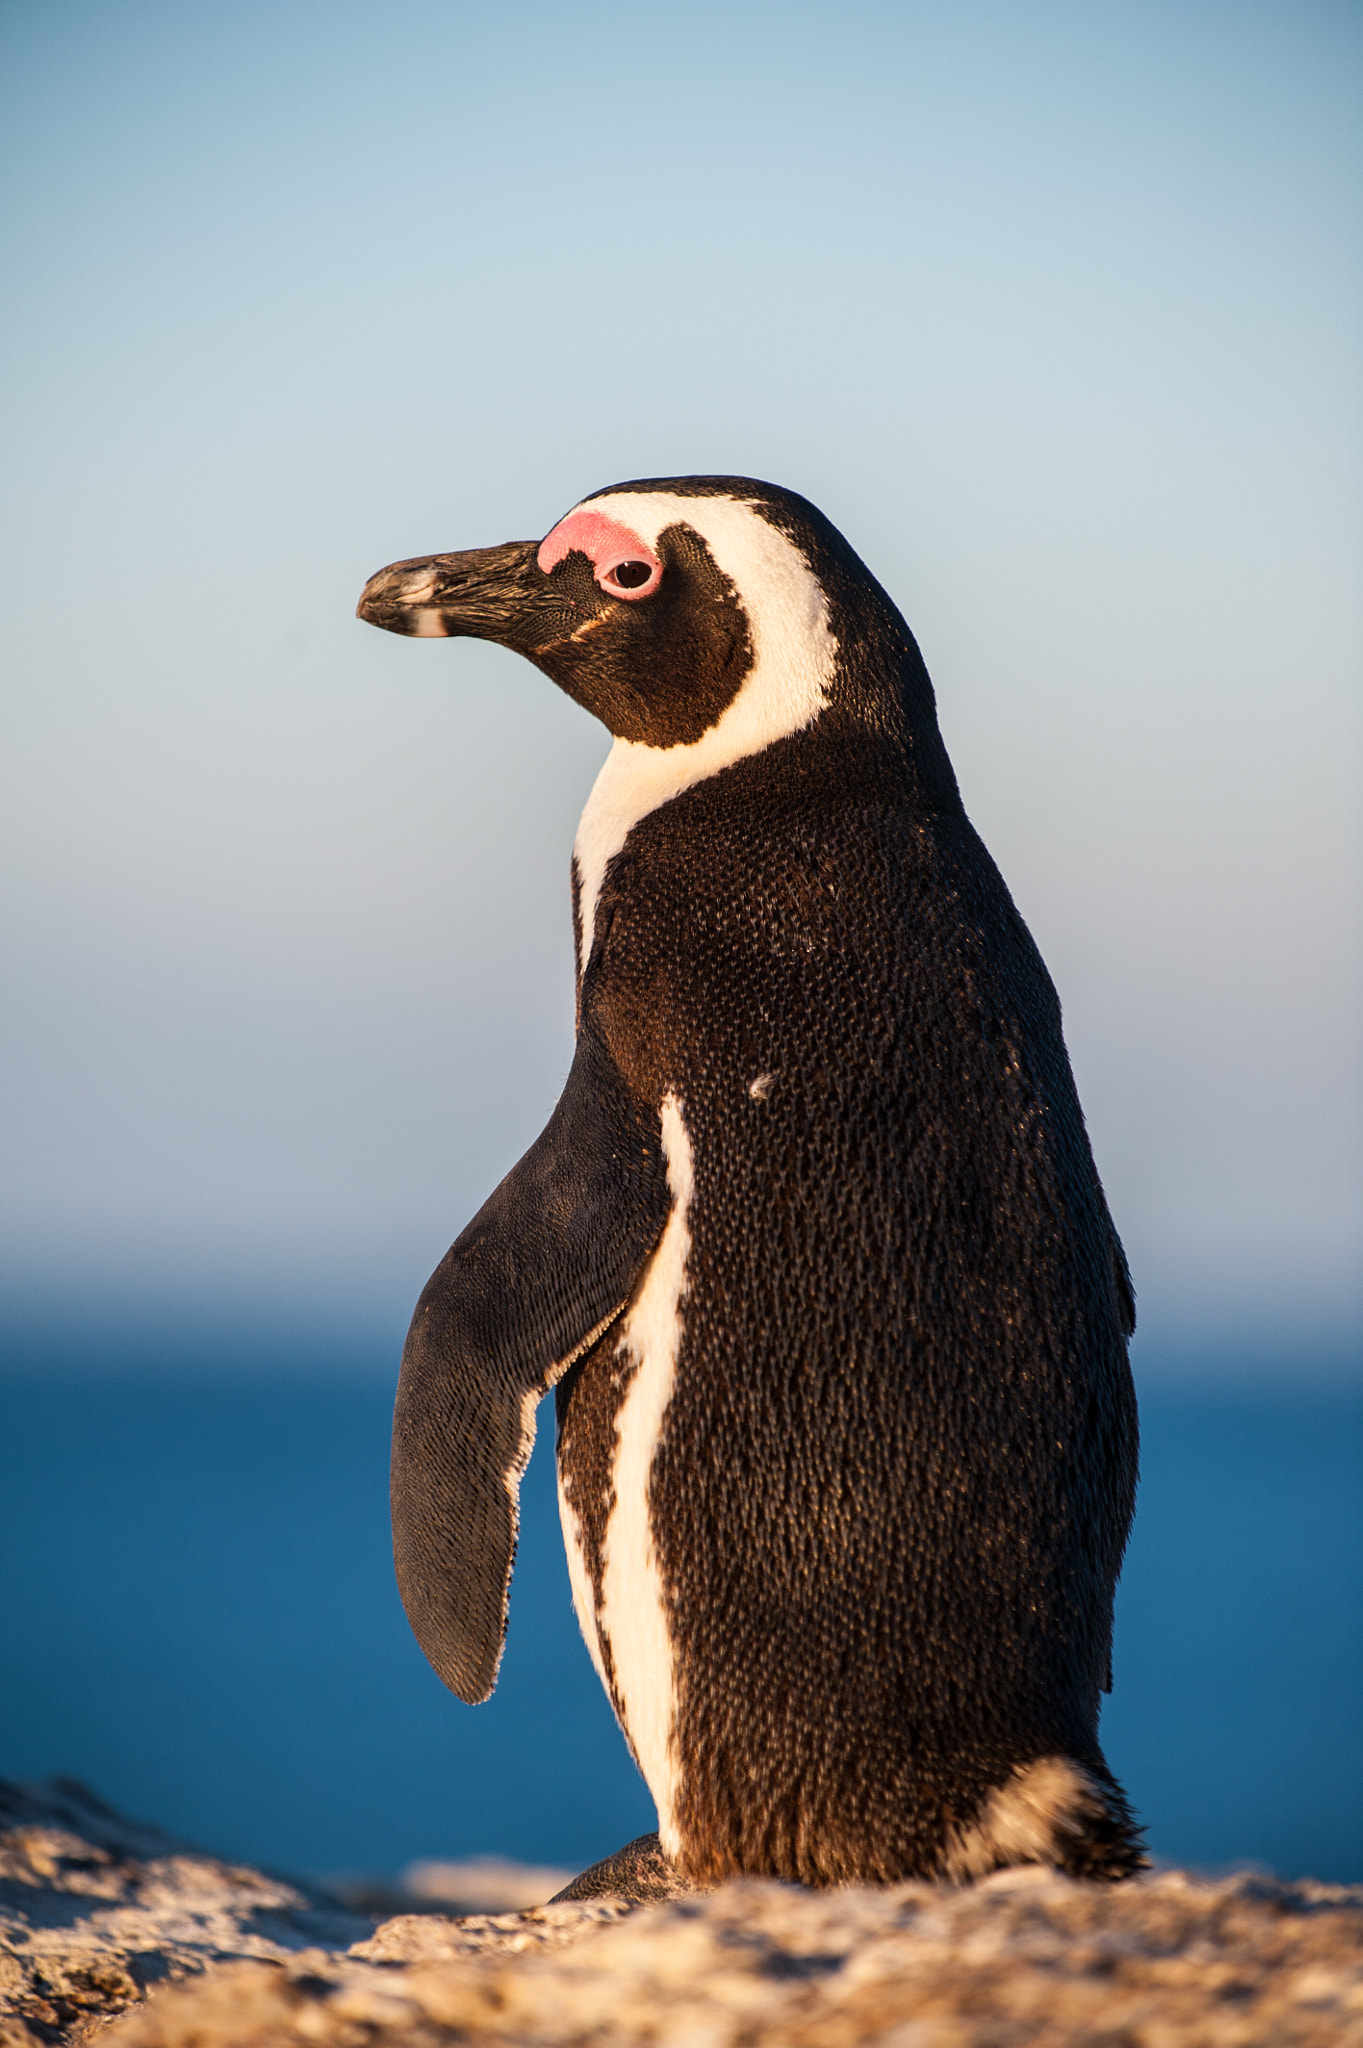 Nikon D3 sample photo. Drowsy penguin standing in the sunshine photography